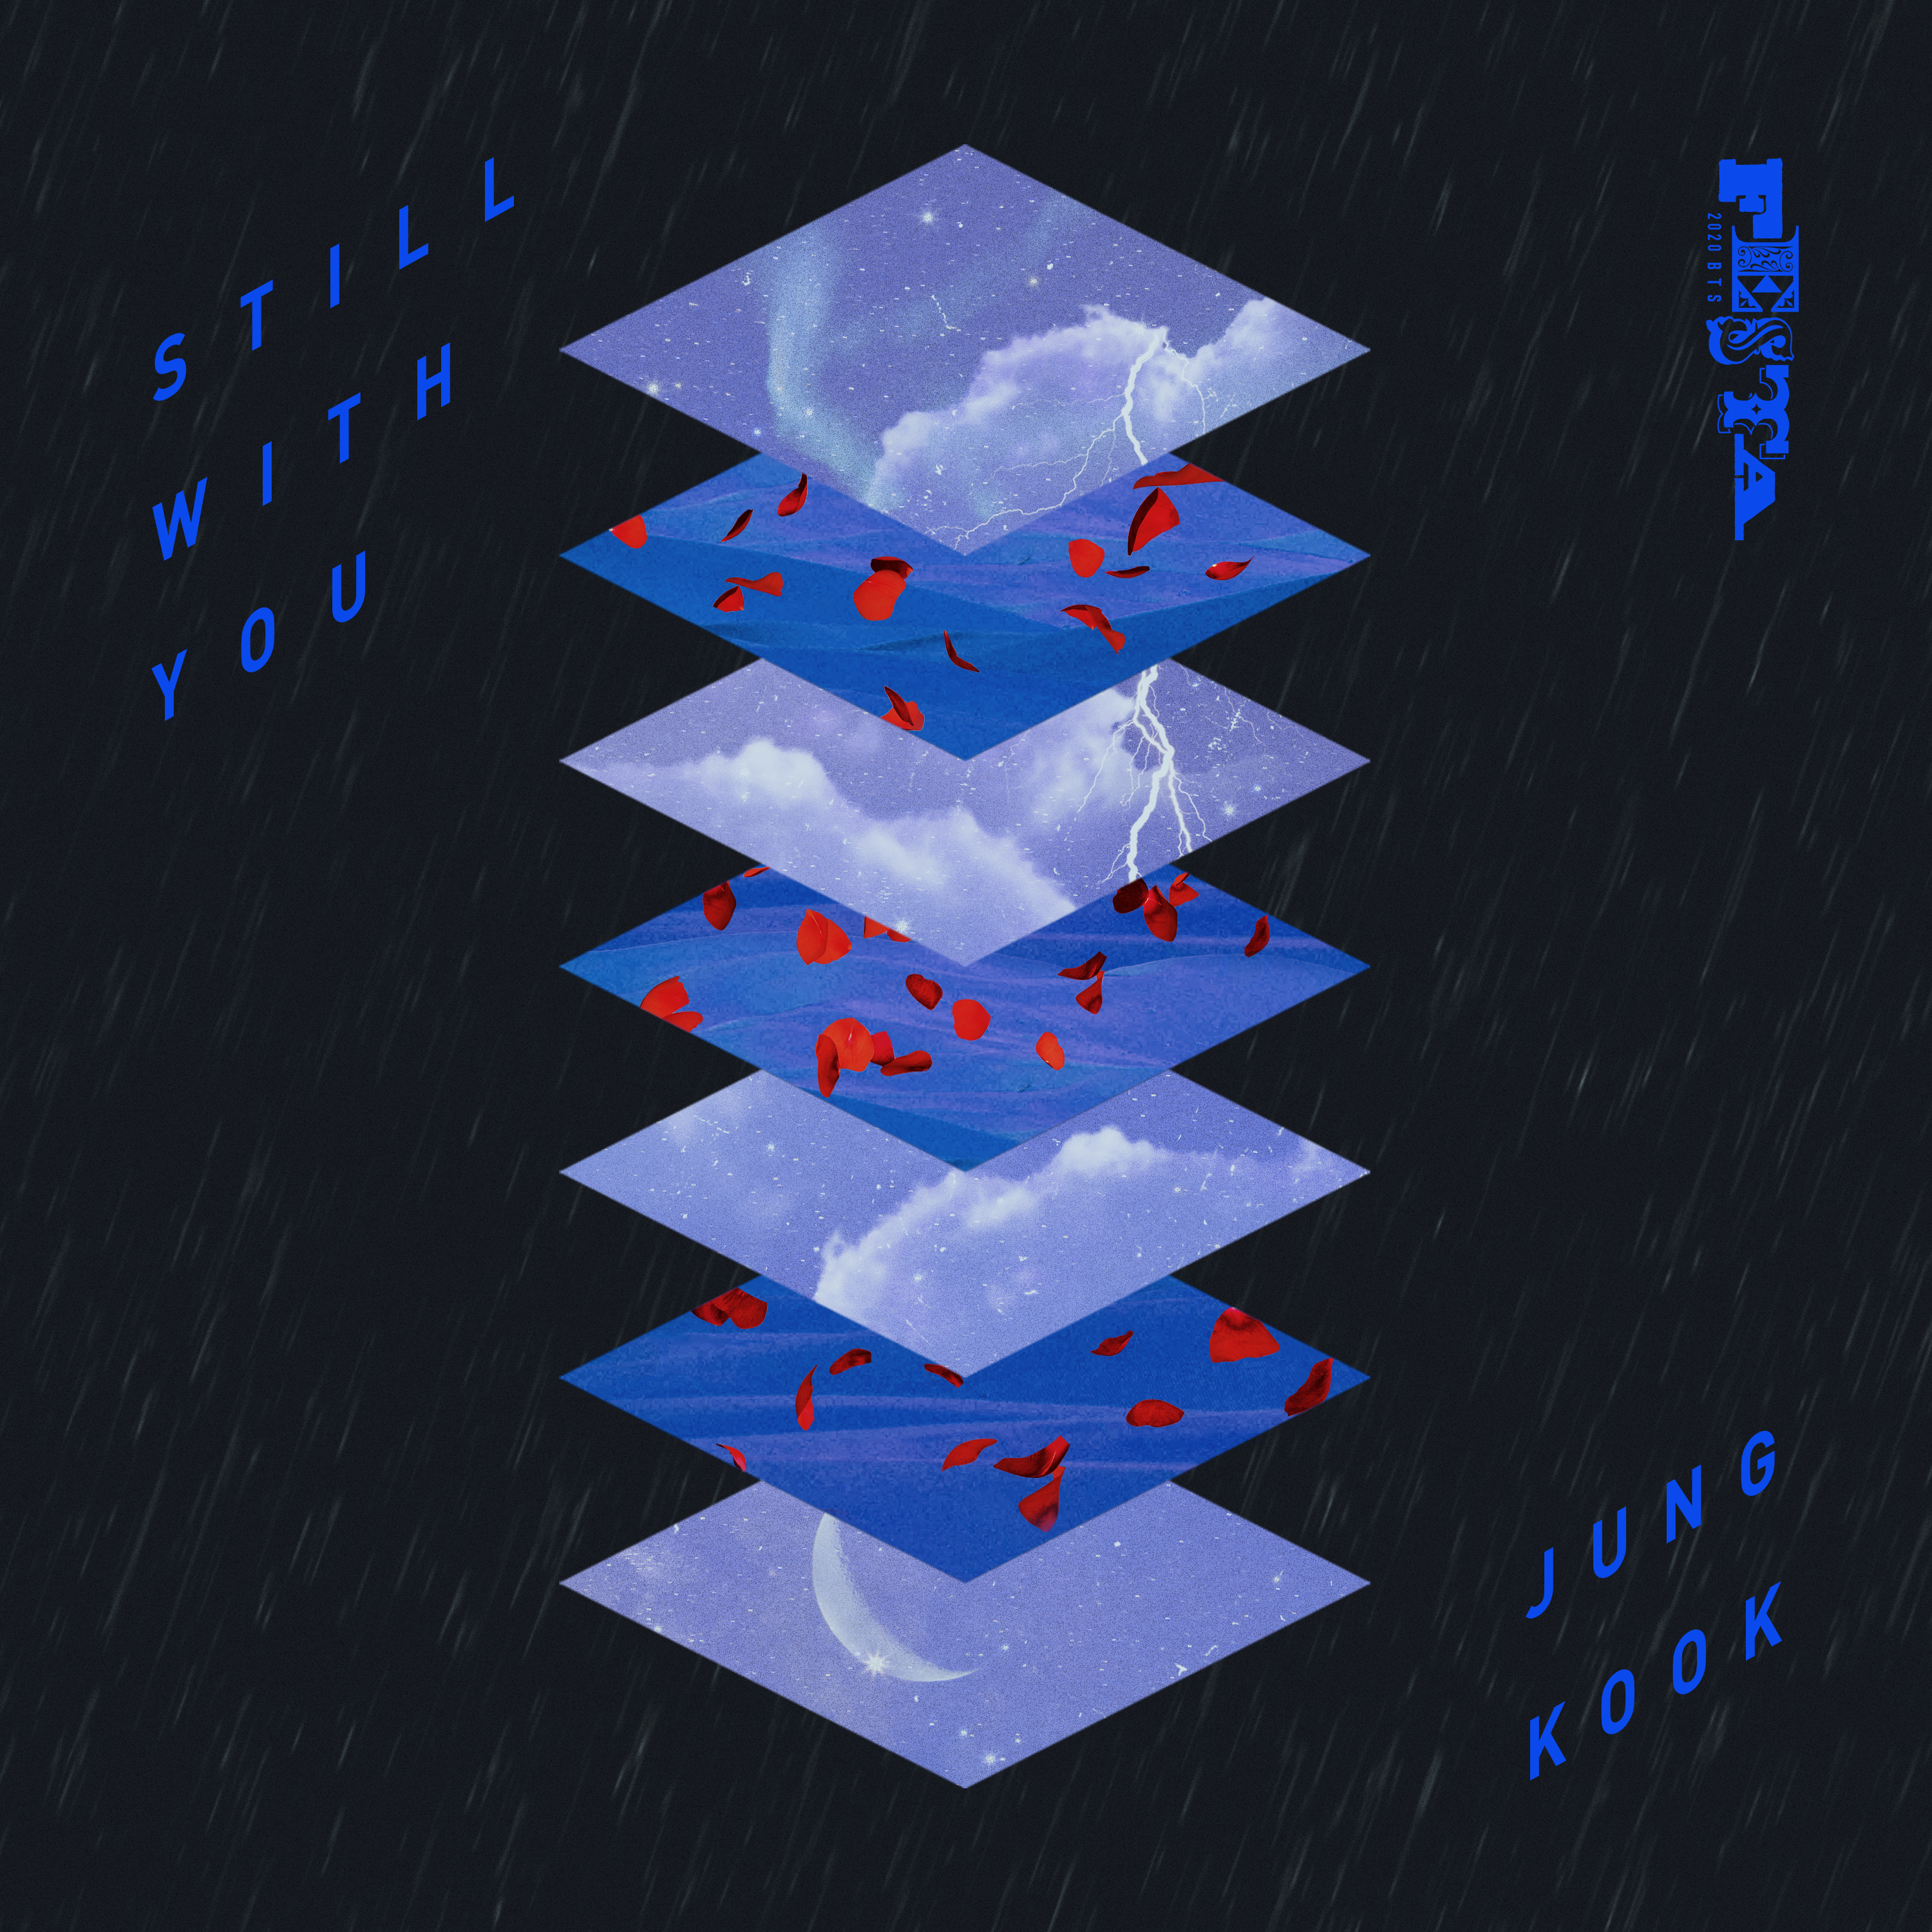 Download Still With You by JK of BTS